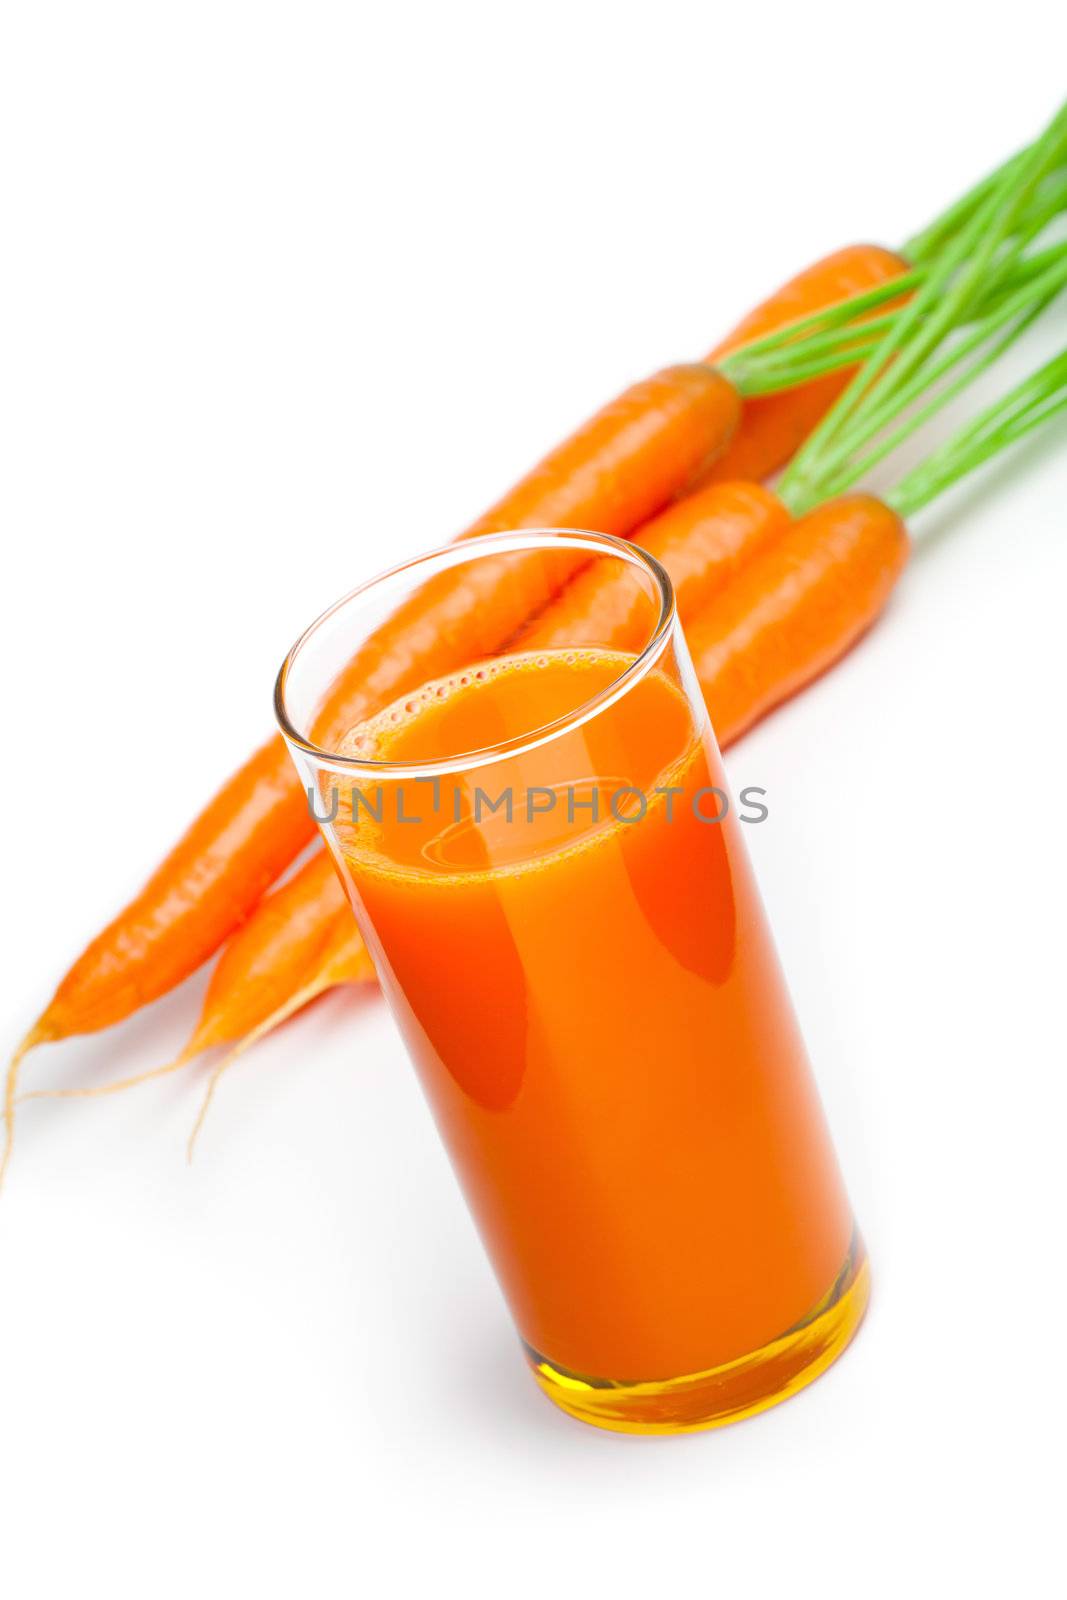 Carrot juice and fresh carrot, isolated on white background